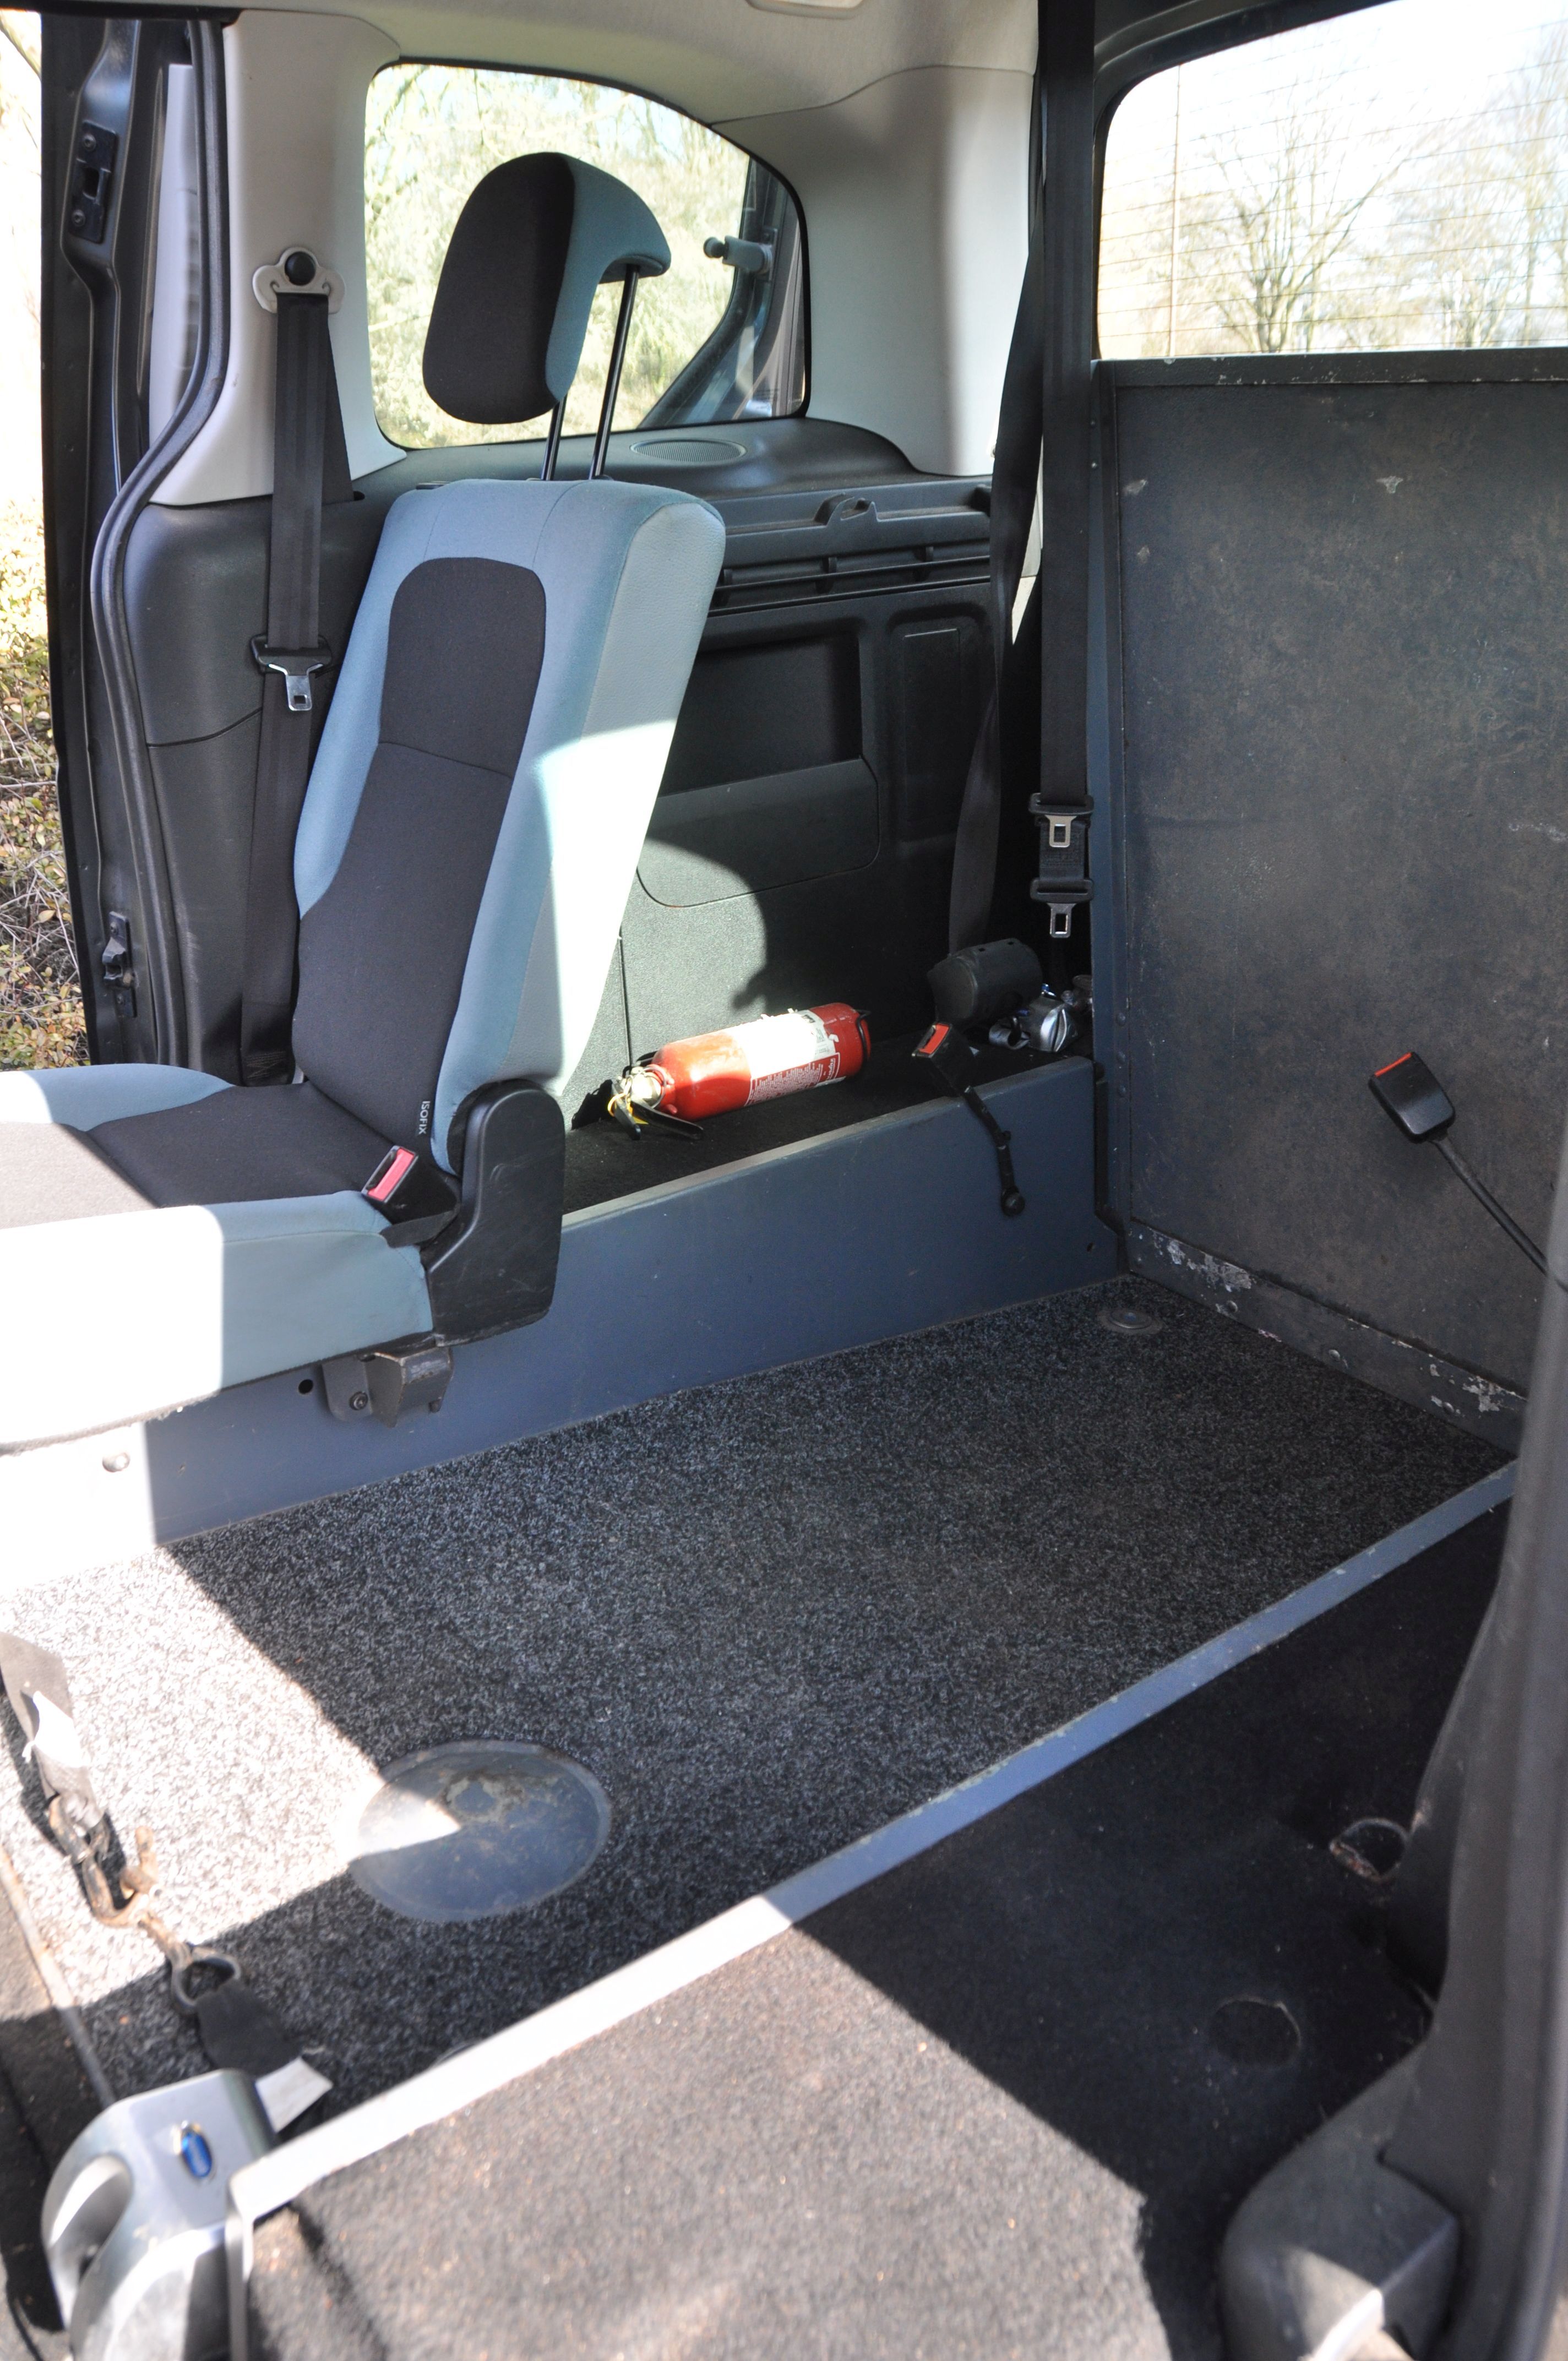 A 2014 CITROEN BERLINGO MULTISPACE GLENEAGLES CONVERSION in grey with two front and one rear seat - Image 7 of 11